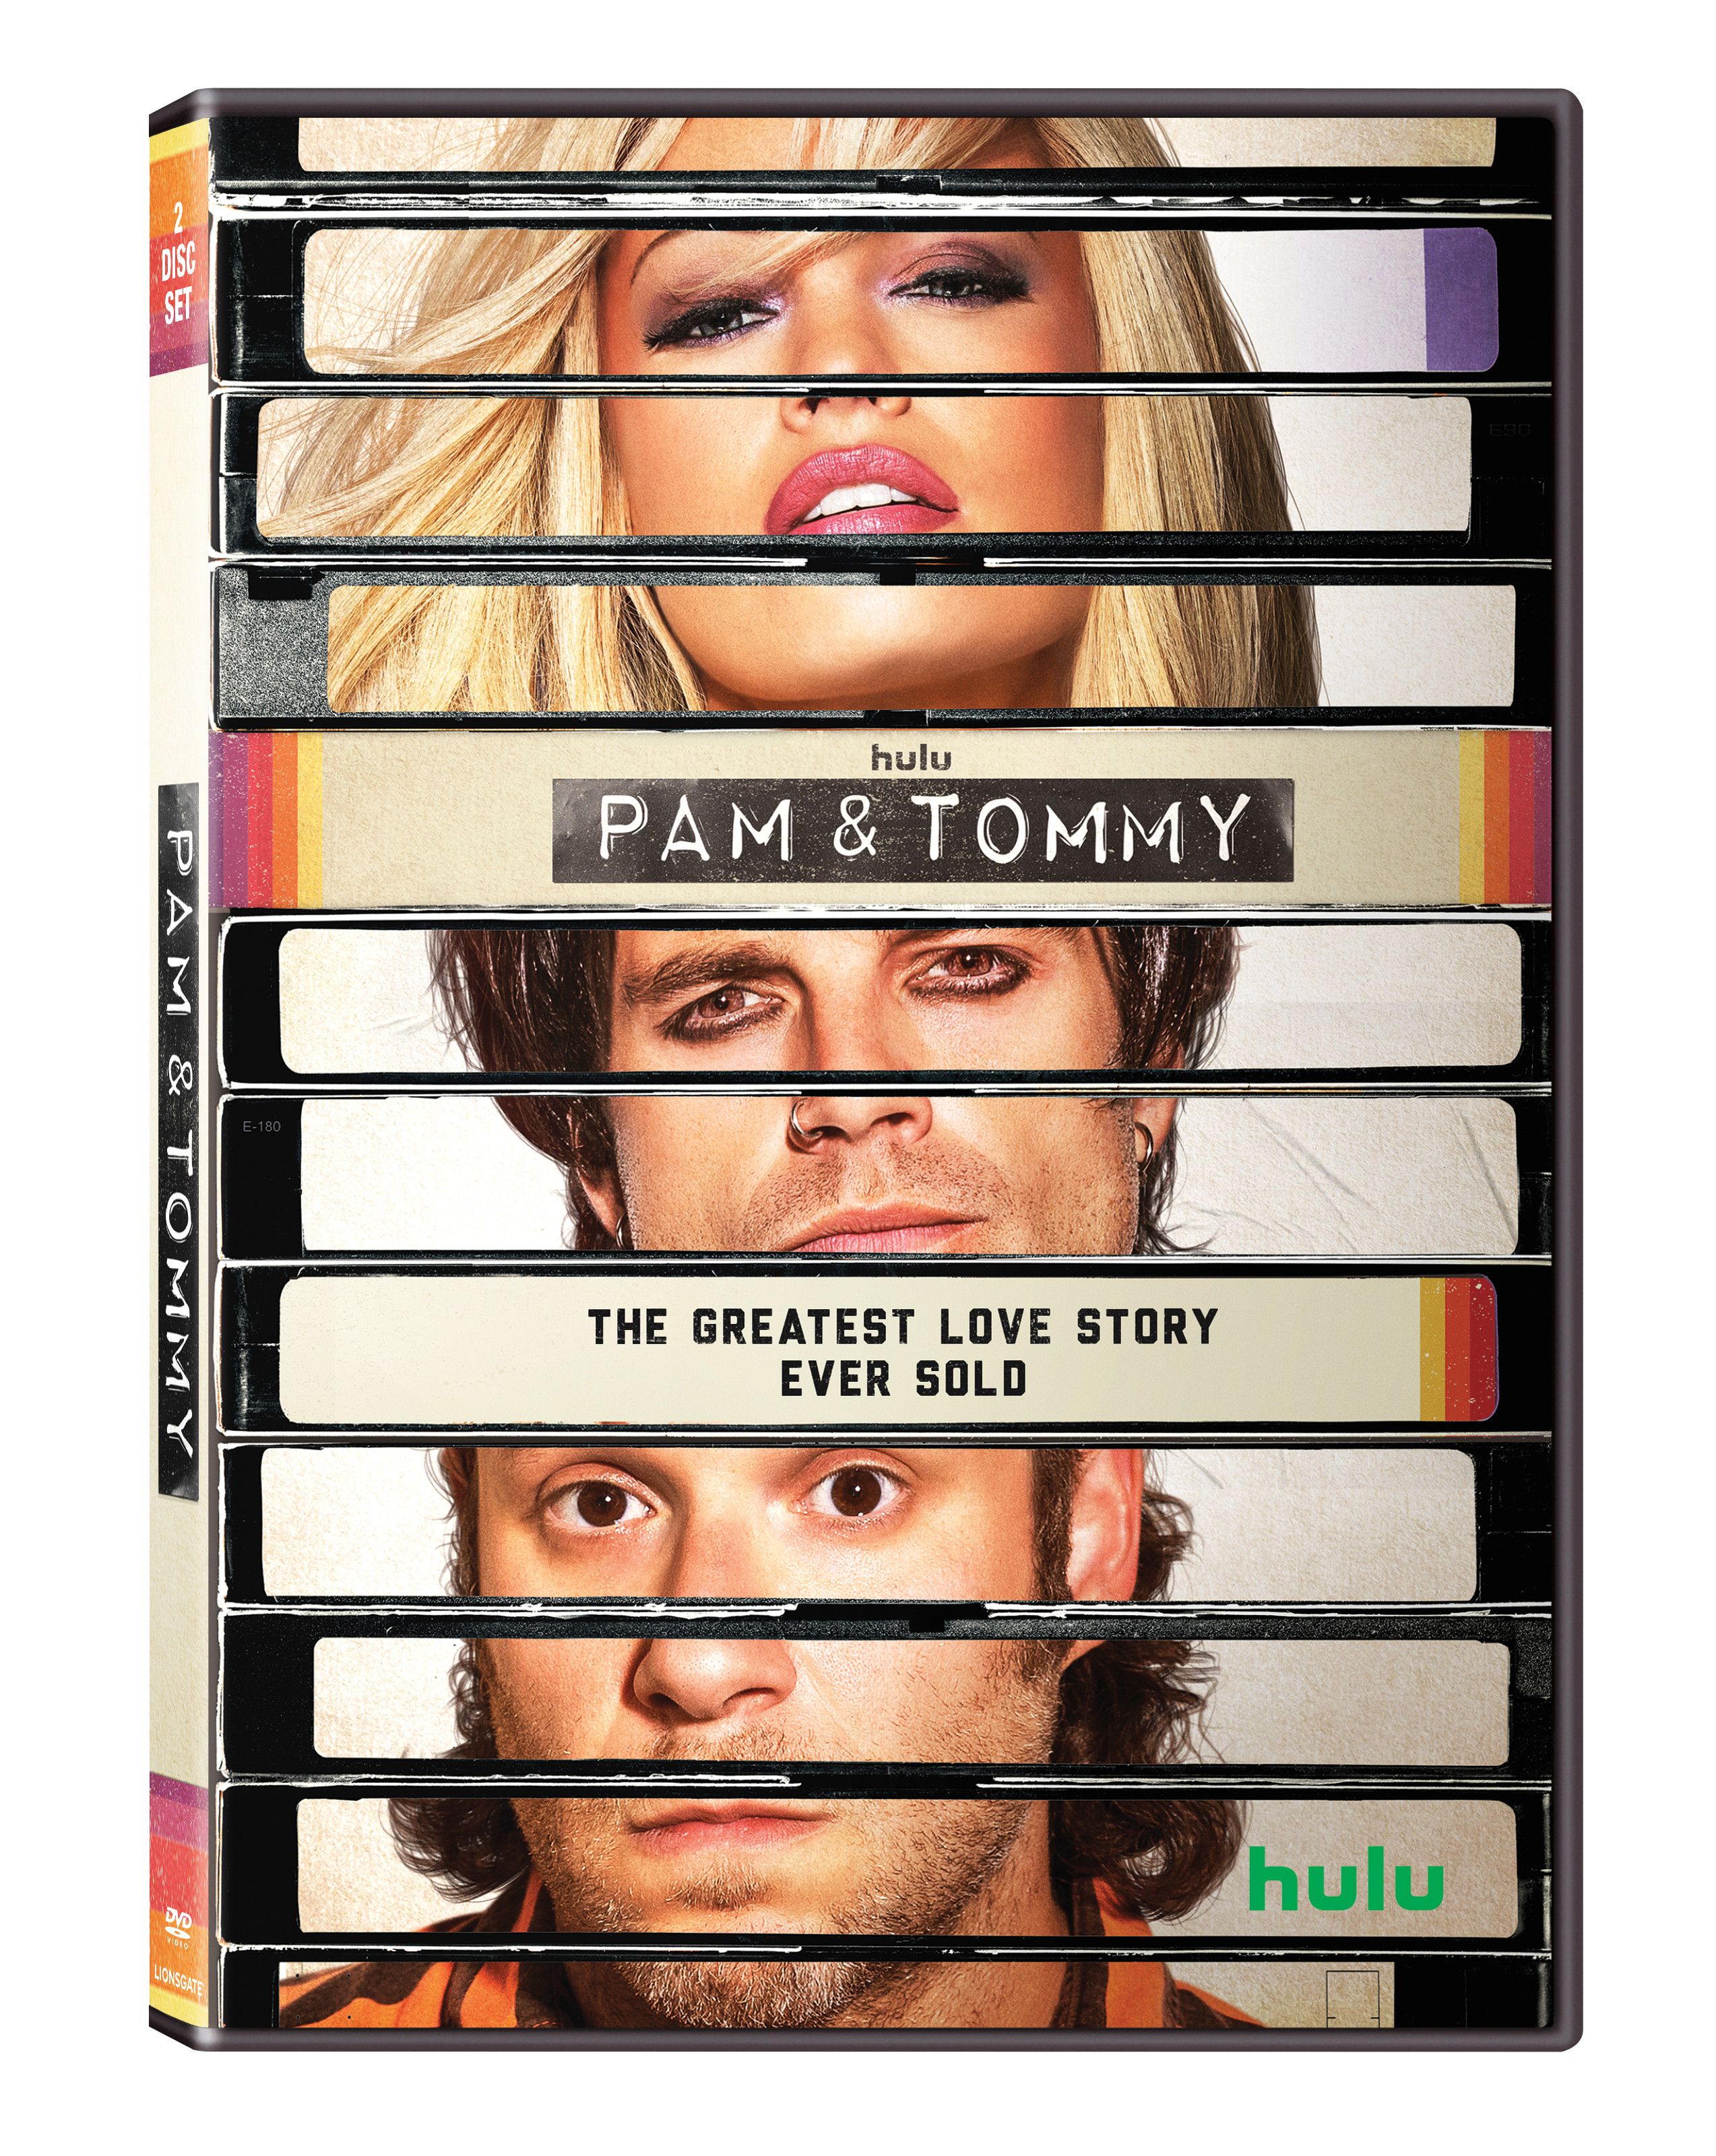 pamtommy dvd